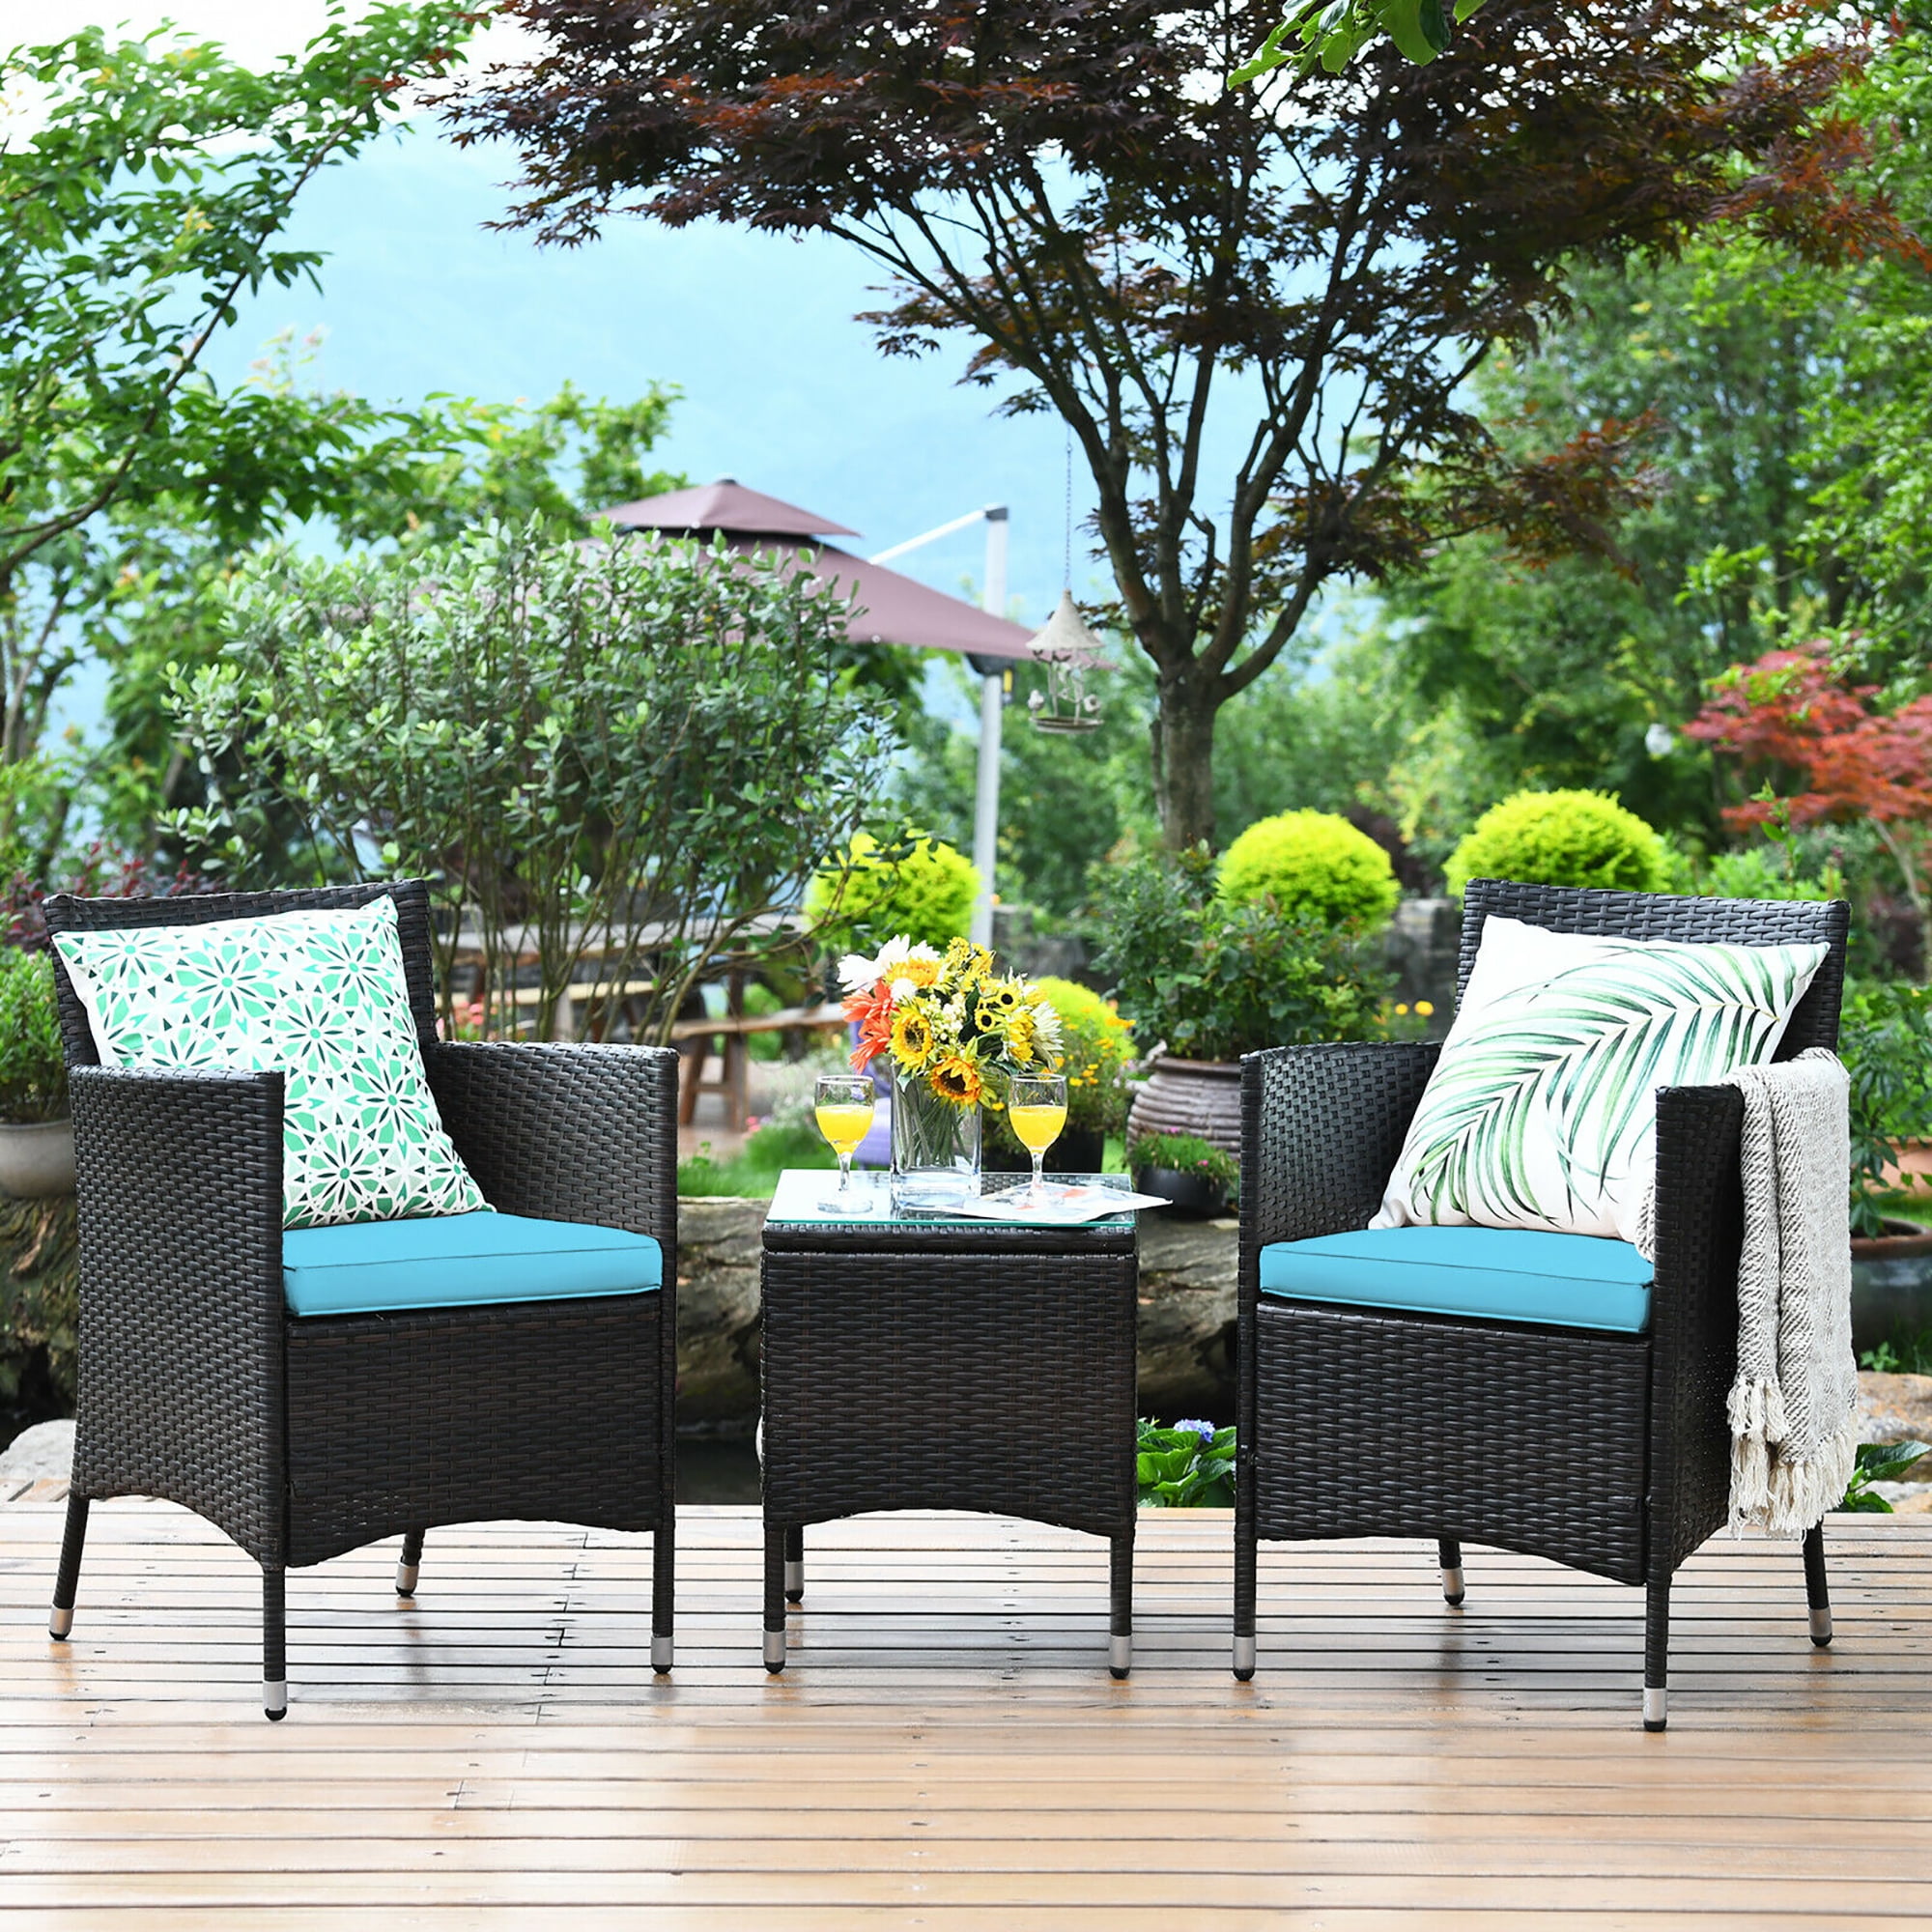 Costway Outdoor 3 PCS Rattan Wicker Furniture Sets Chairs Coffee Table Garden Blue - image 1 of 10